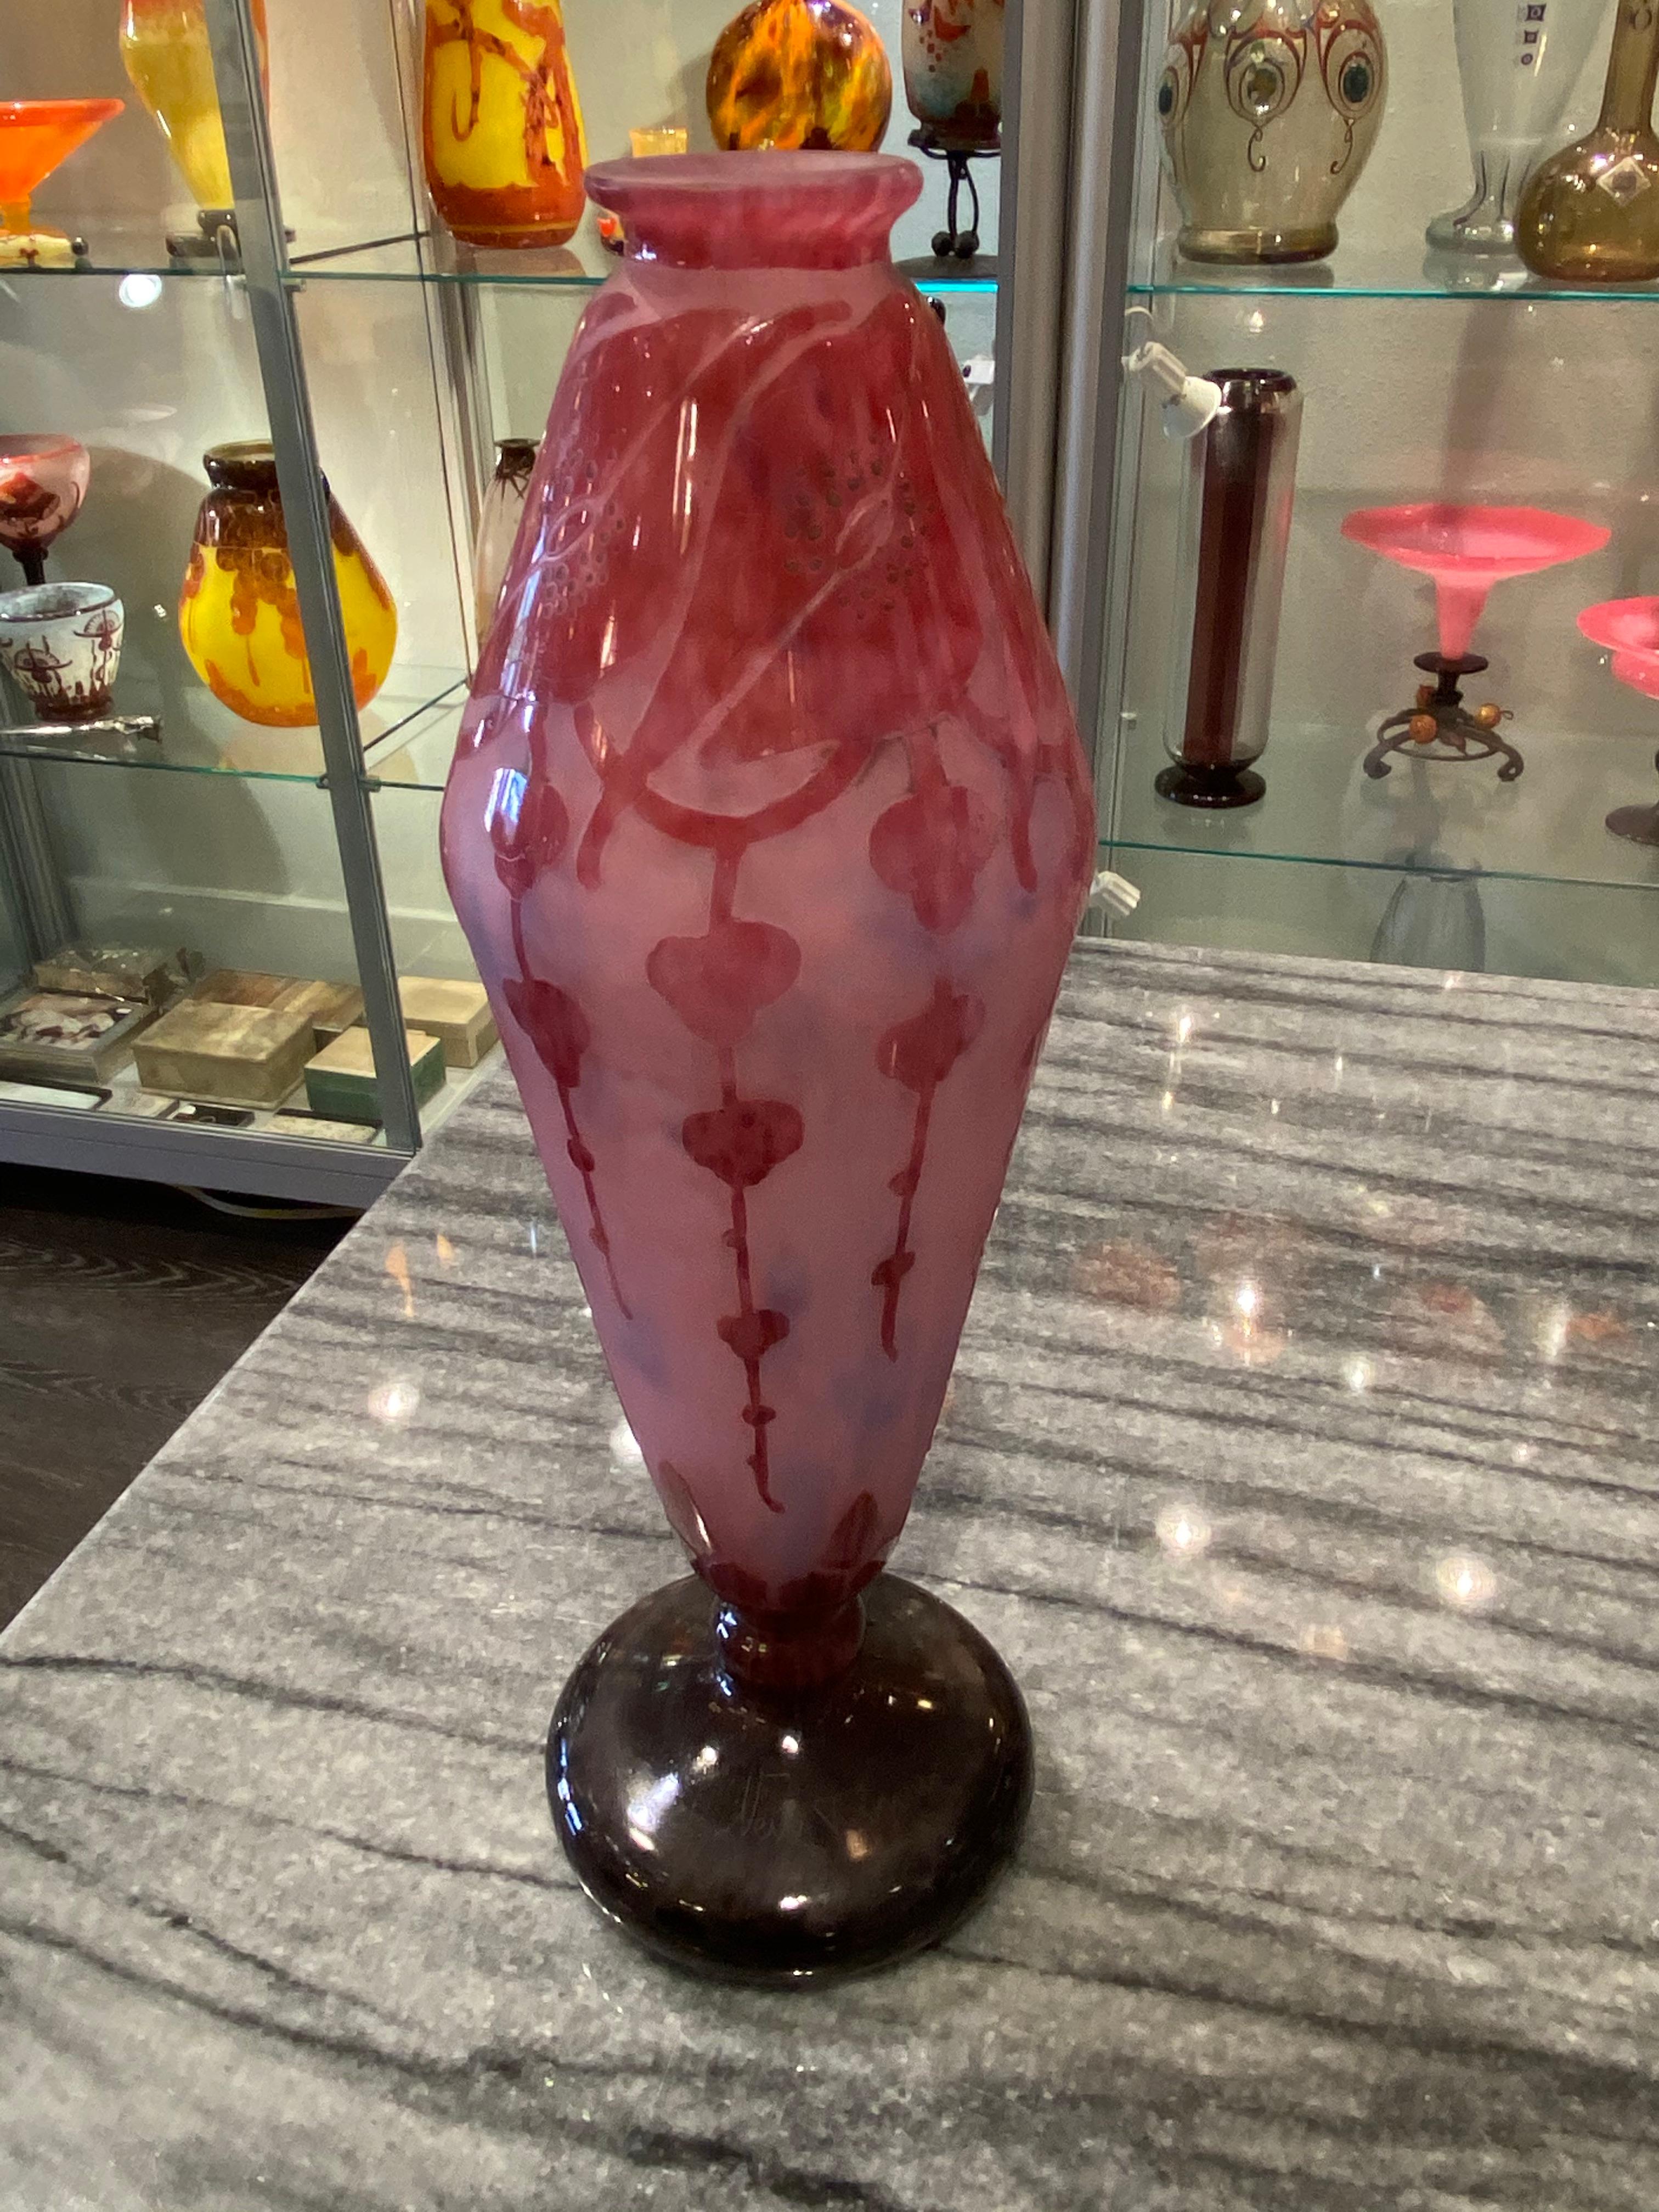 A Mottled Pale Pink satiné and Blue glass vase overlaid with Dark Pink to Violet flower wreath.  The pattern is acid-etched. The foot and stem of this vase are in Violet. This piece belongs to the Garances serie from Le Verre Français.  
Signature: